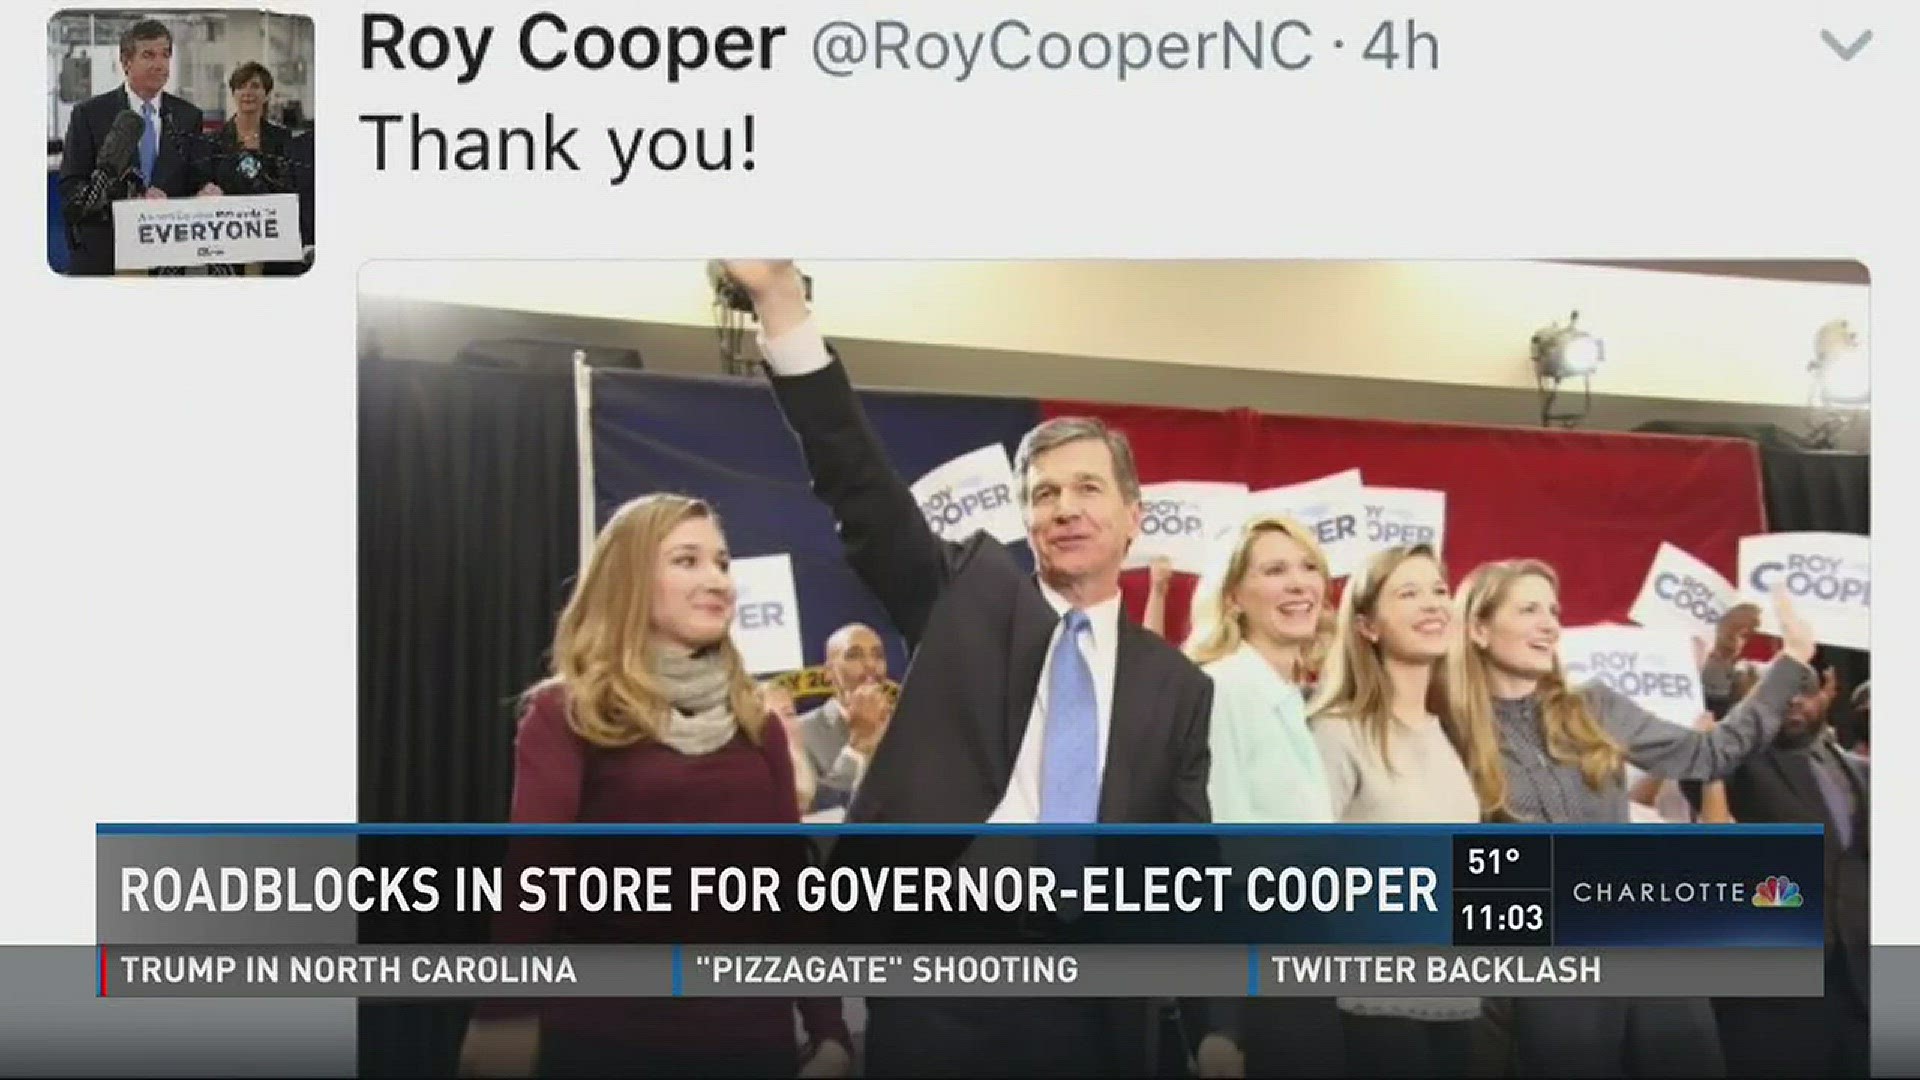 Almost a month after Election Day, the governor's race in North Carolina is finally decided.